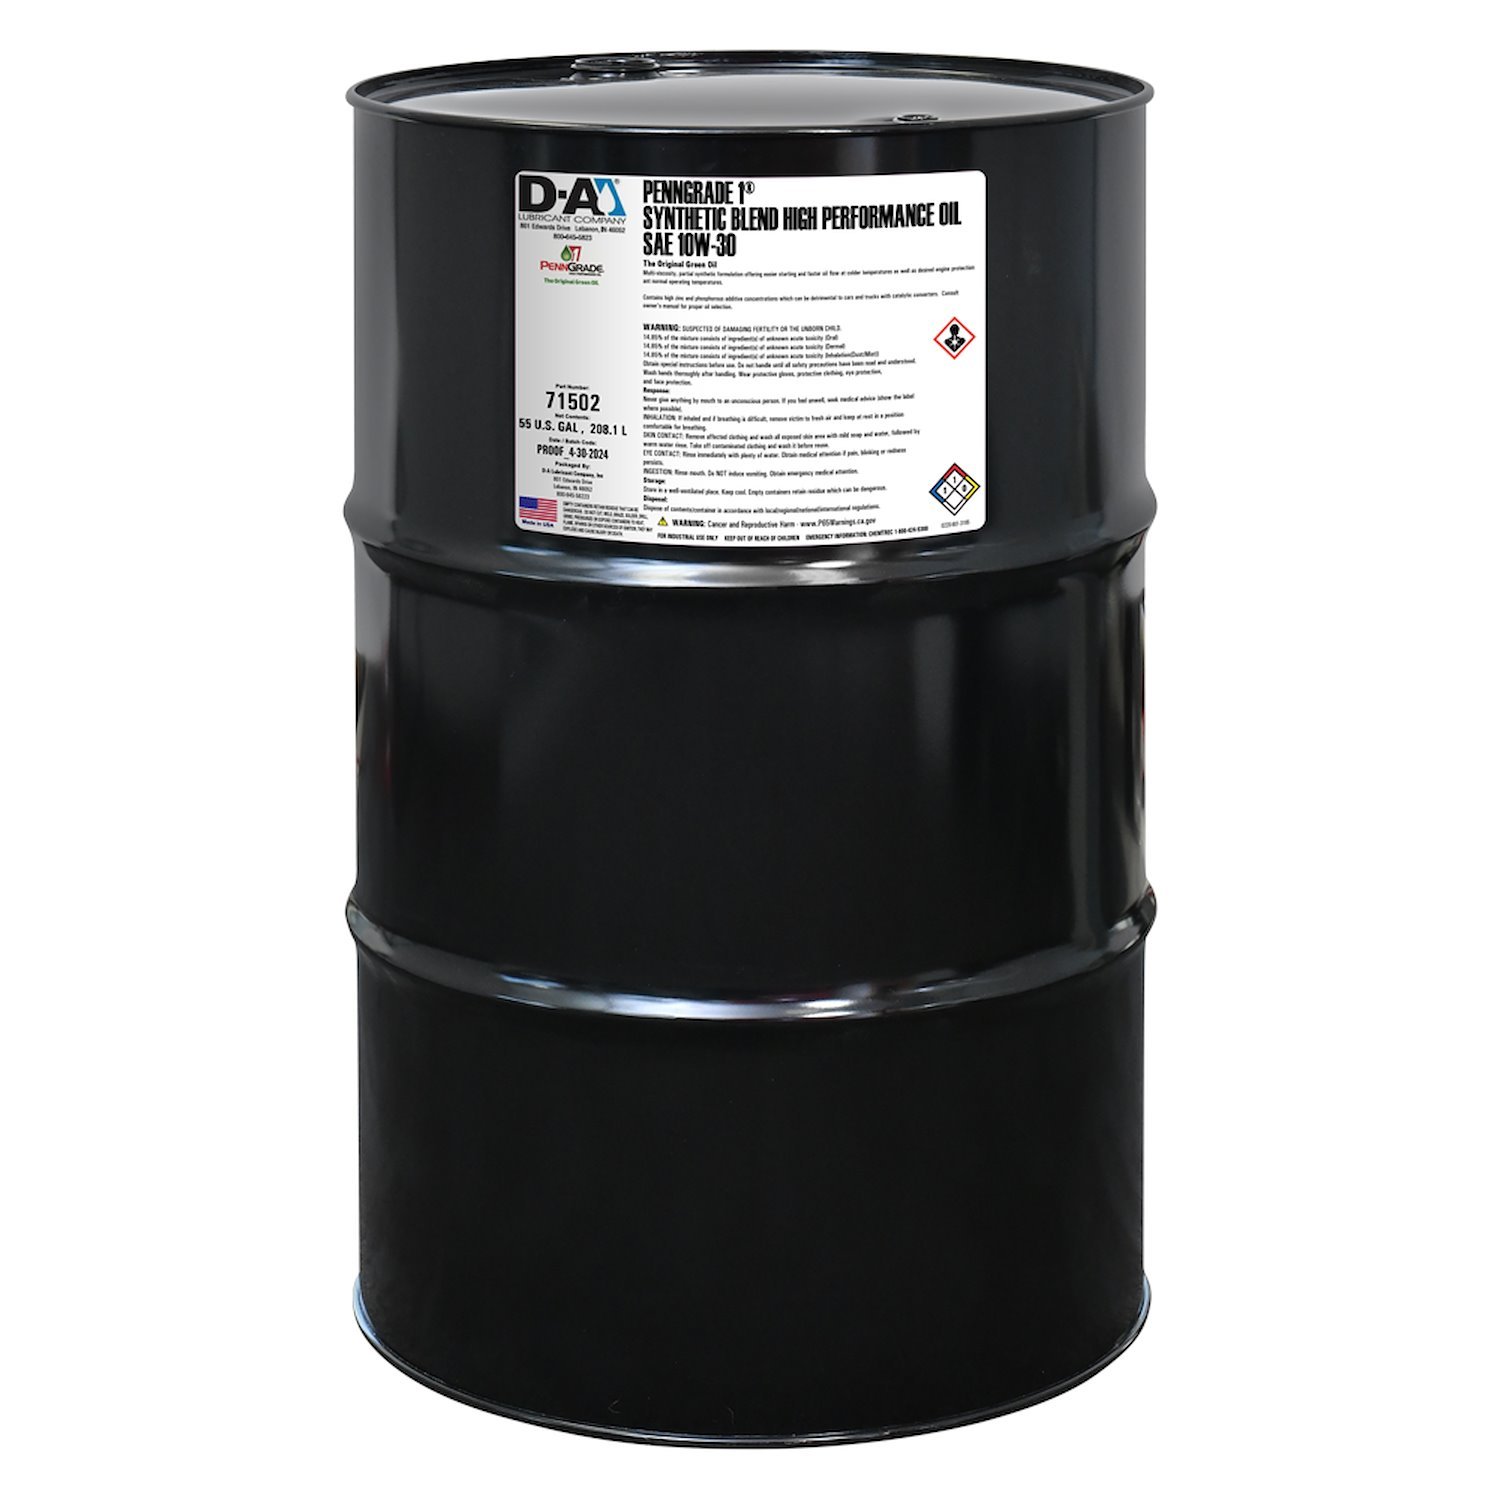 71502 Synthetic Blend High Performance Motor Oil SAE 10W-30 - 55 Gallon Drum